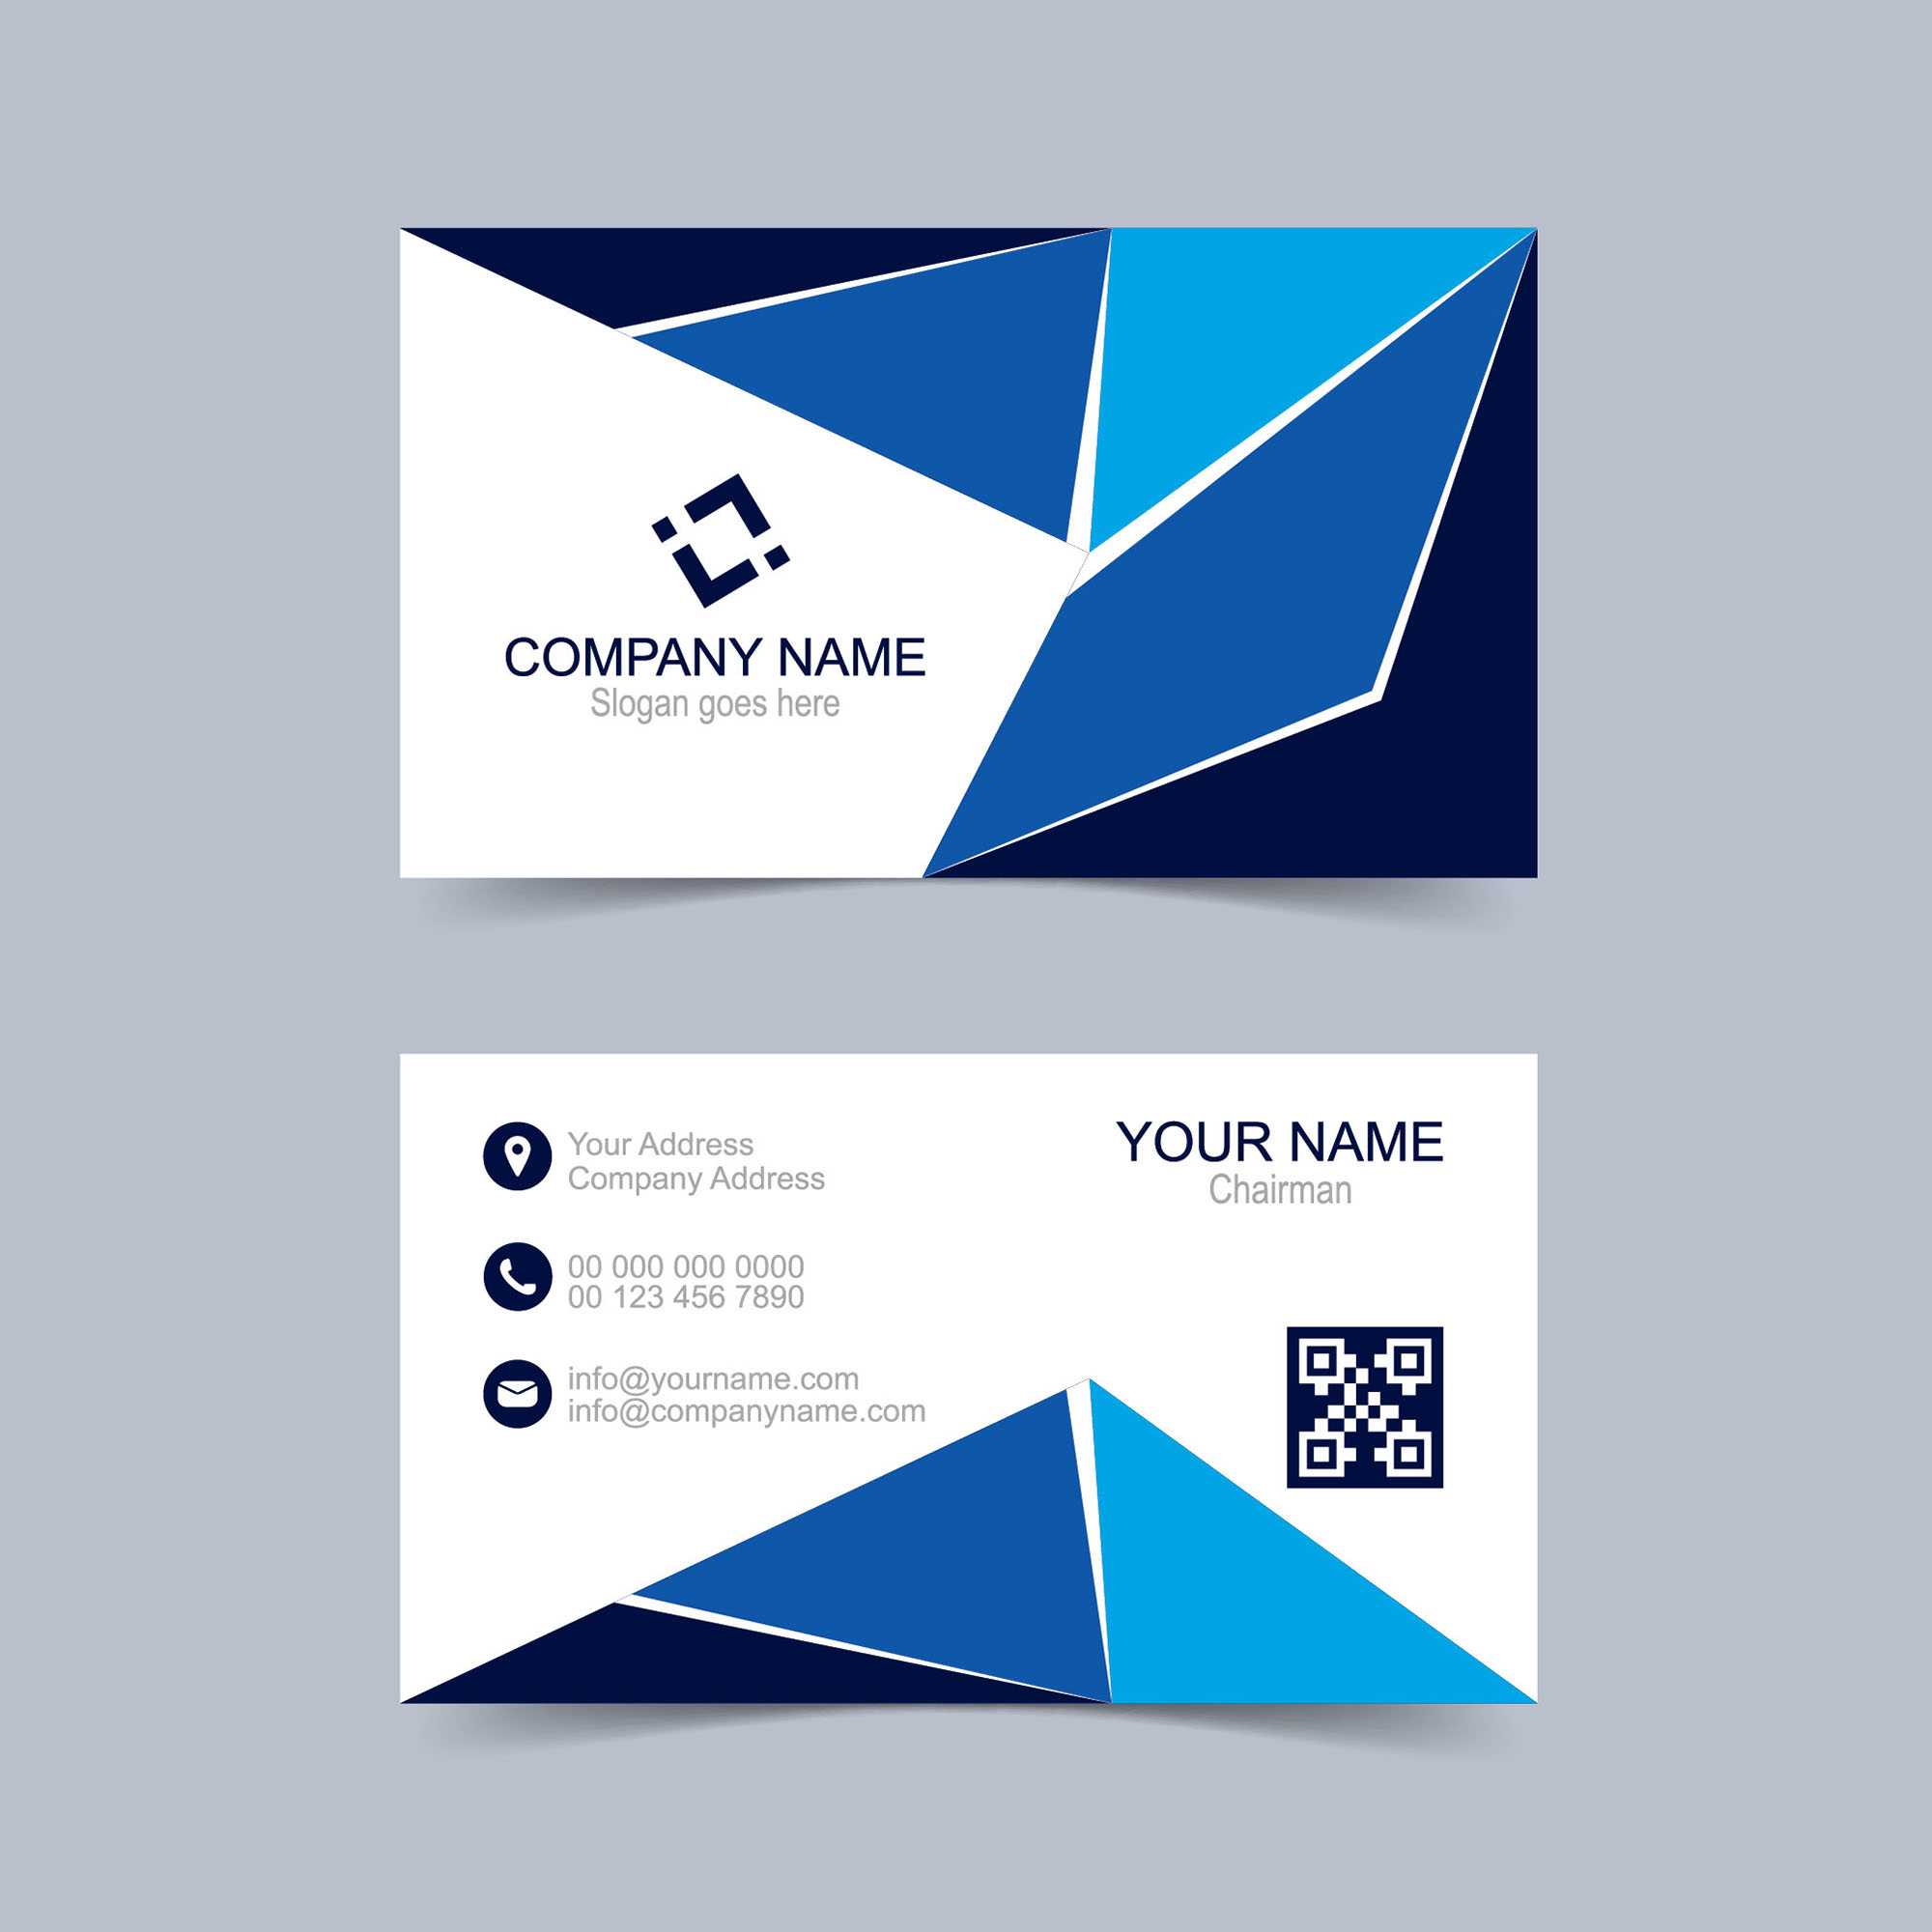 Template For Calling Card CUMED ORG